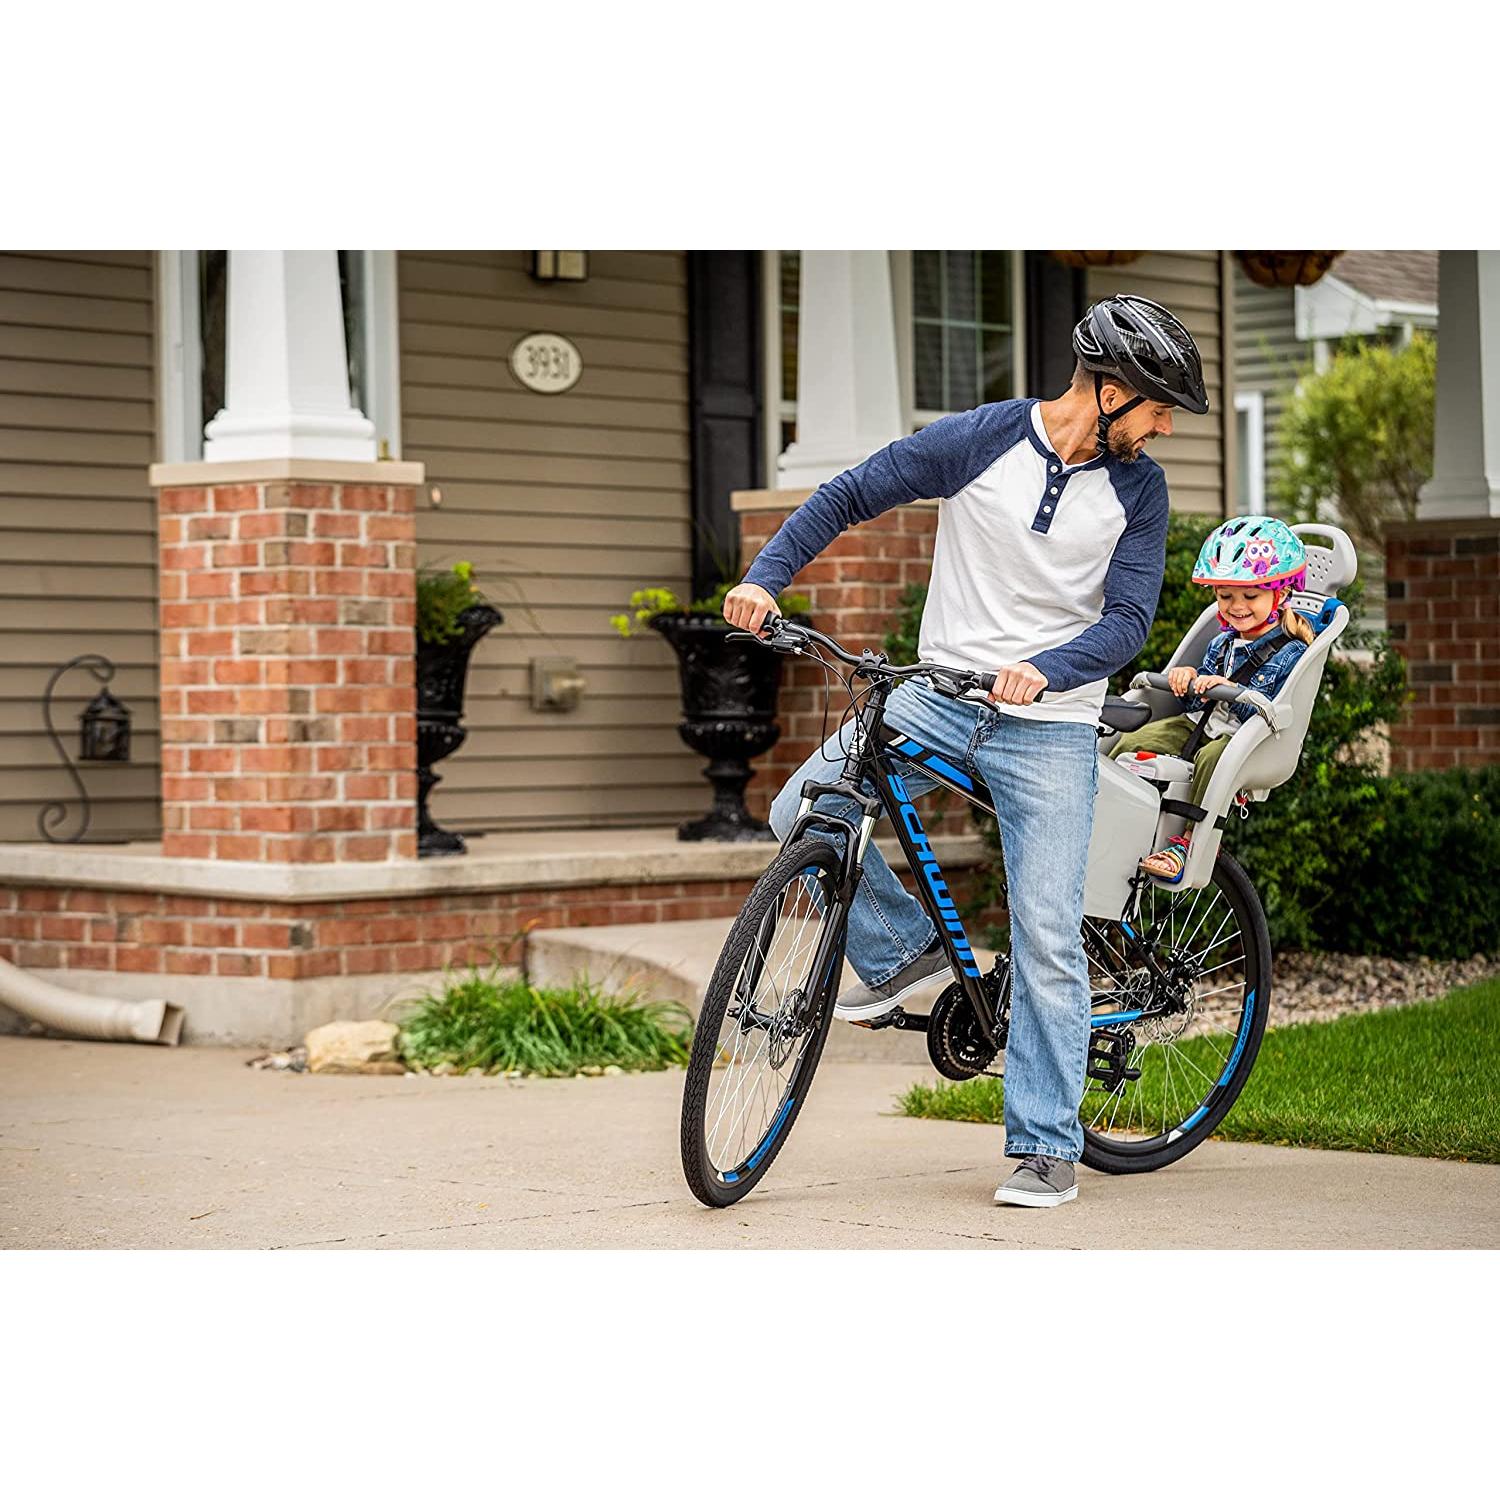 Schwinn Deluxe Bicycle Mounted Child Carrier/Bike Seat For Children, Toddlers, and Kids